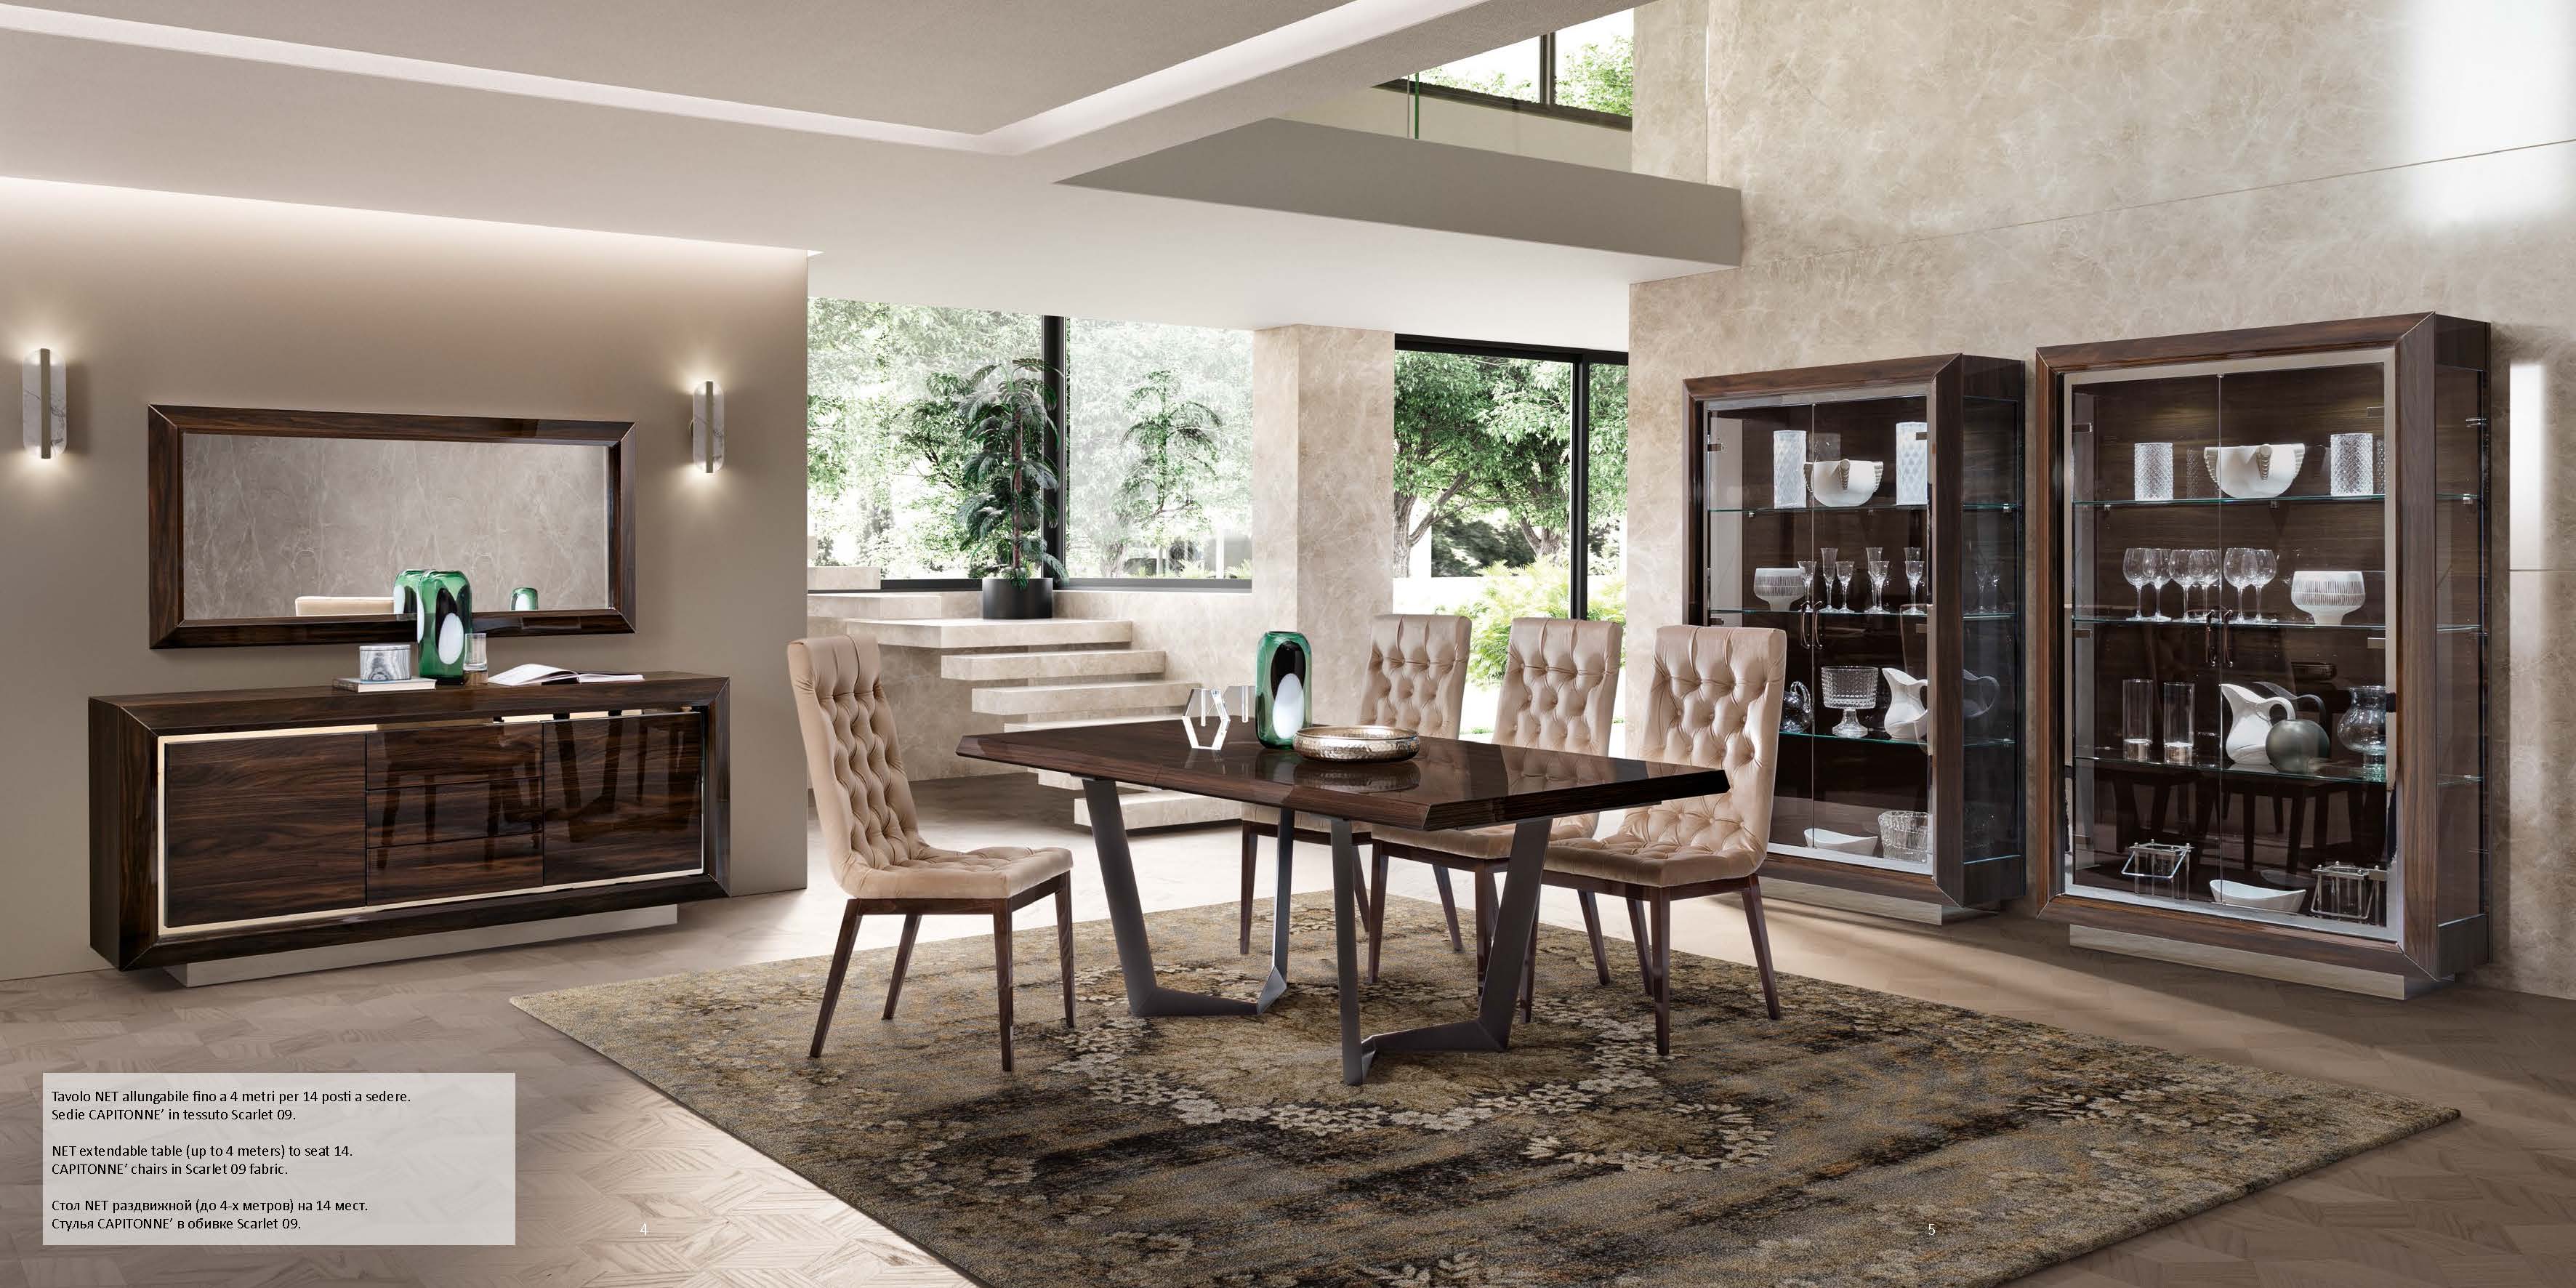 Clearance Dining Room Elite Day Walnut Dining Additional items